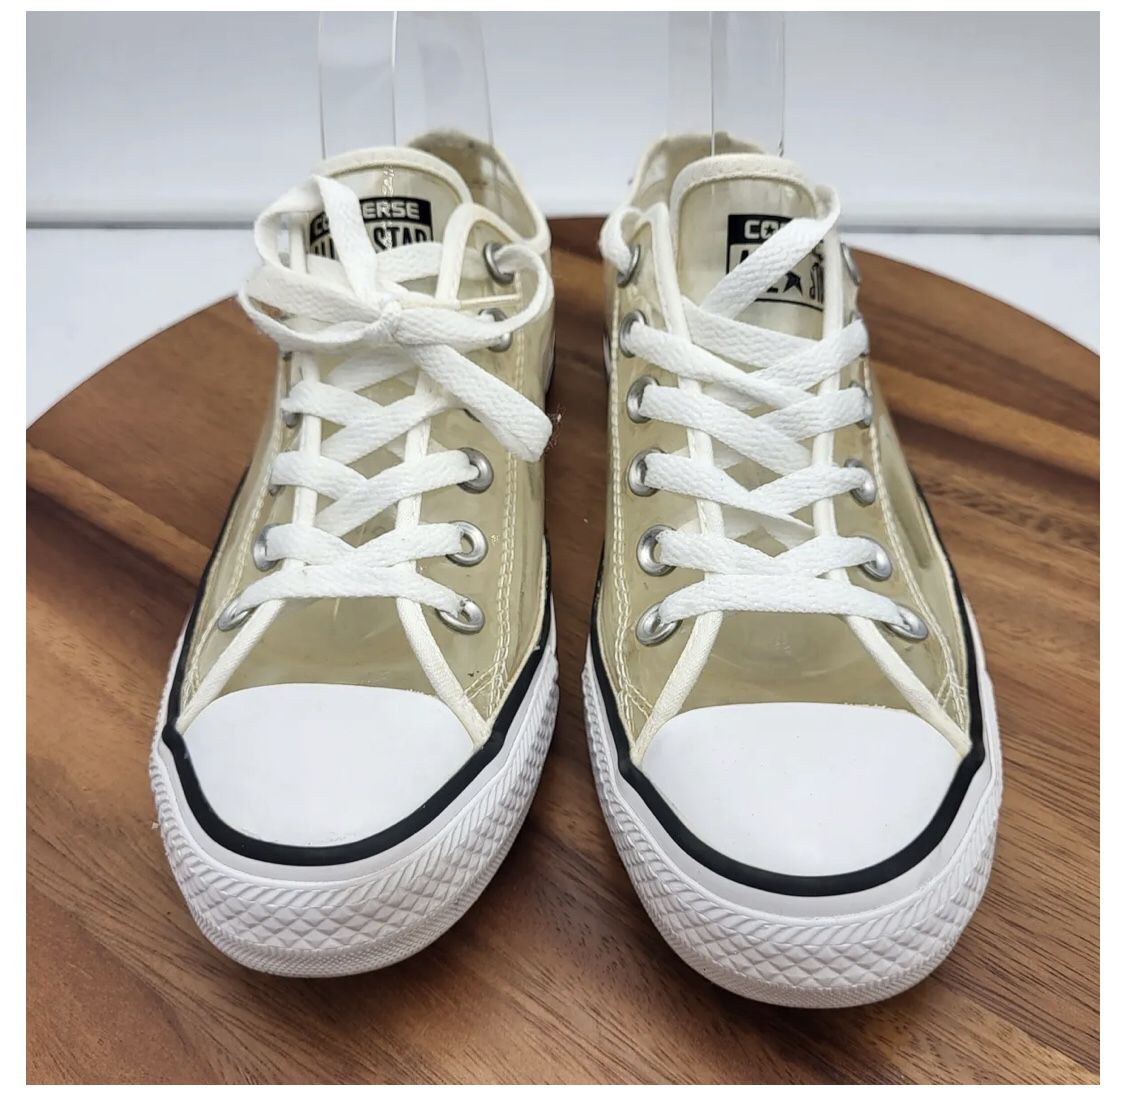 Sneakers CONVERSE ALL STAR size 7 Clear Transparent 